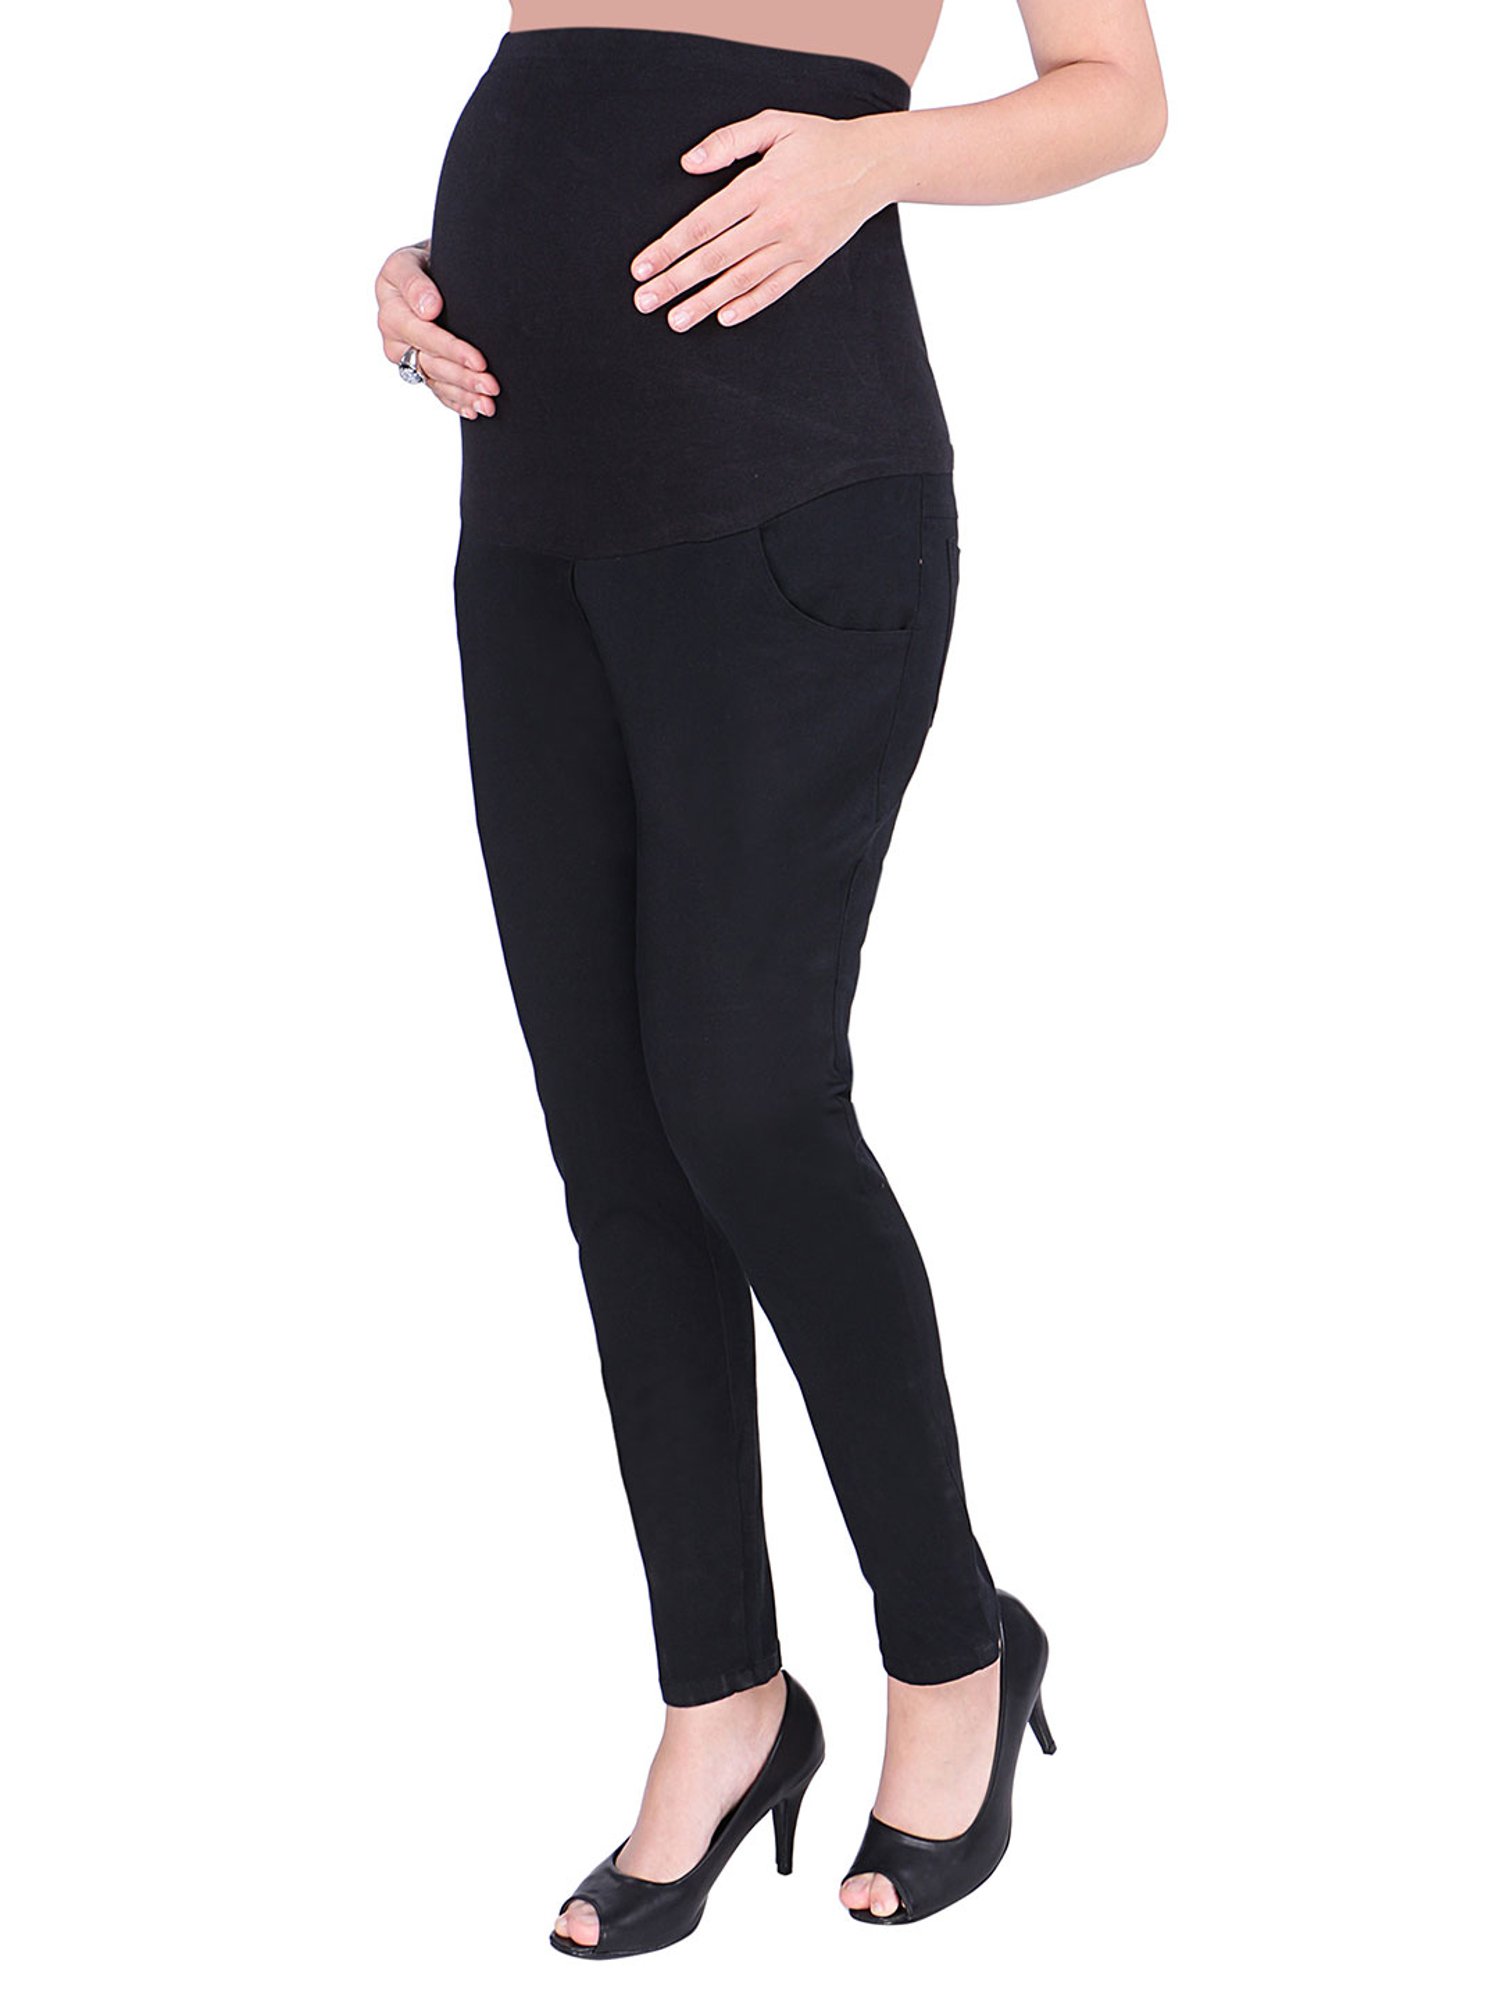 Trousers  1848 1532 for pregnant women Photo price information